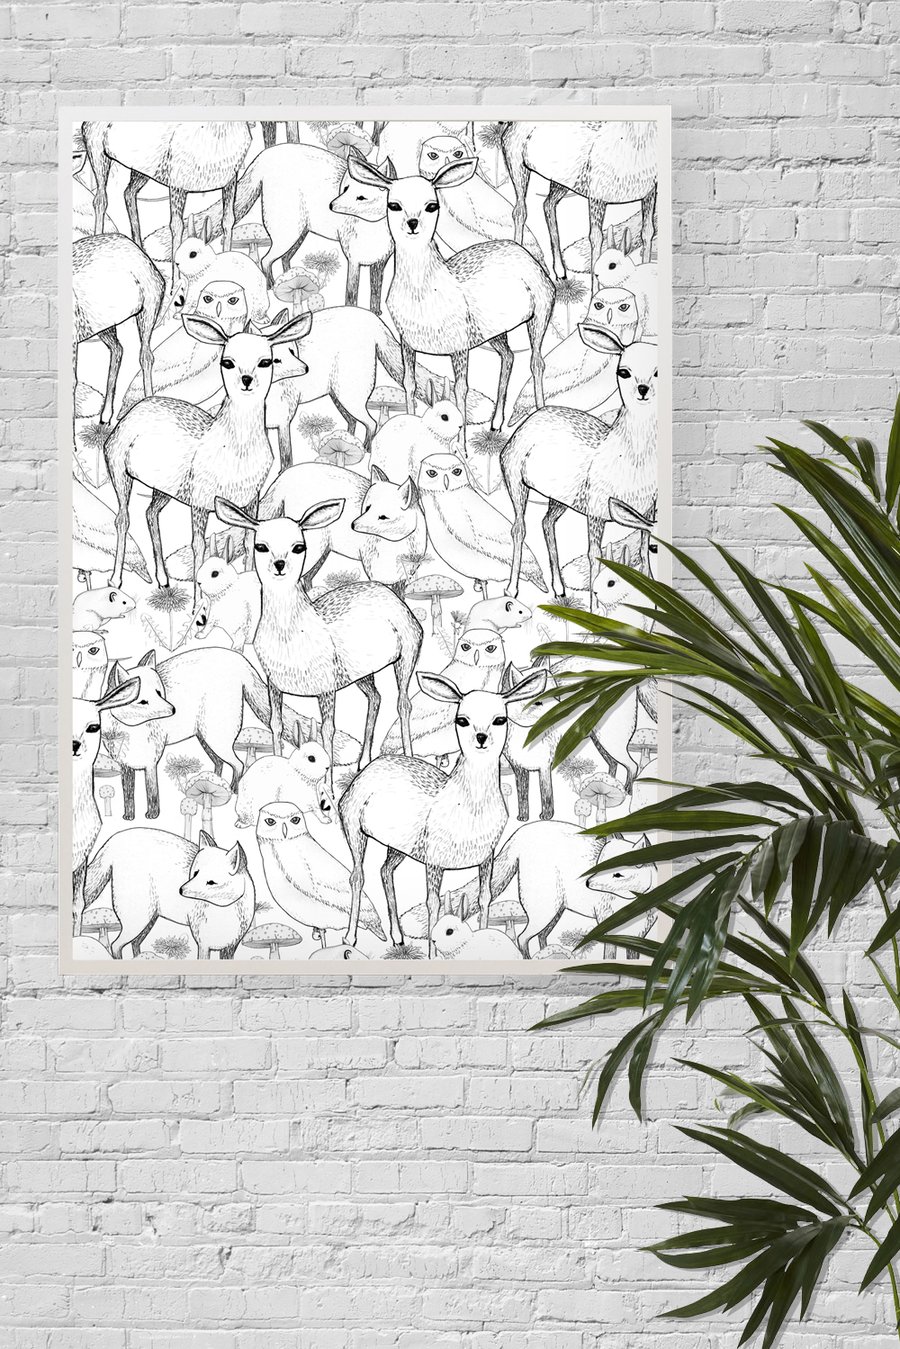 Woodland A3 Giclée Print, with deers, rabbits, owls, foxes and more!